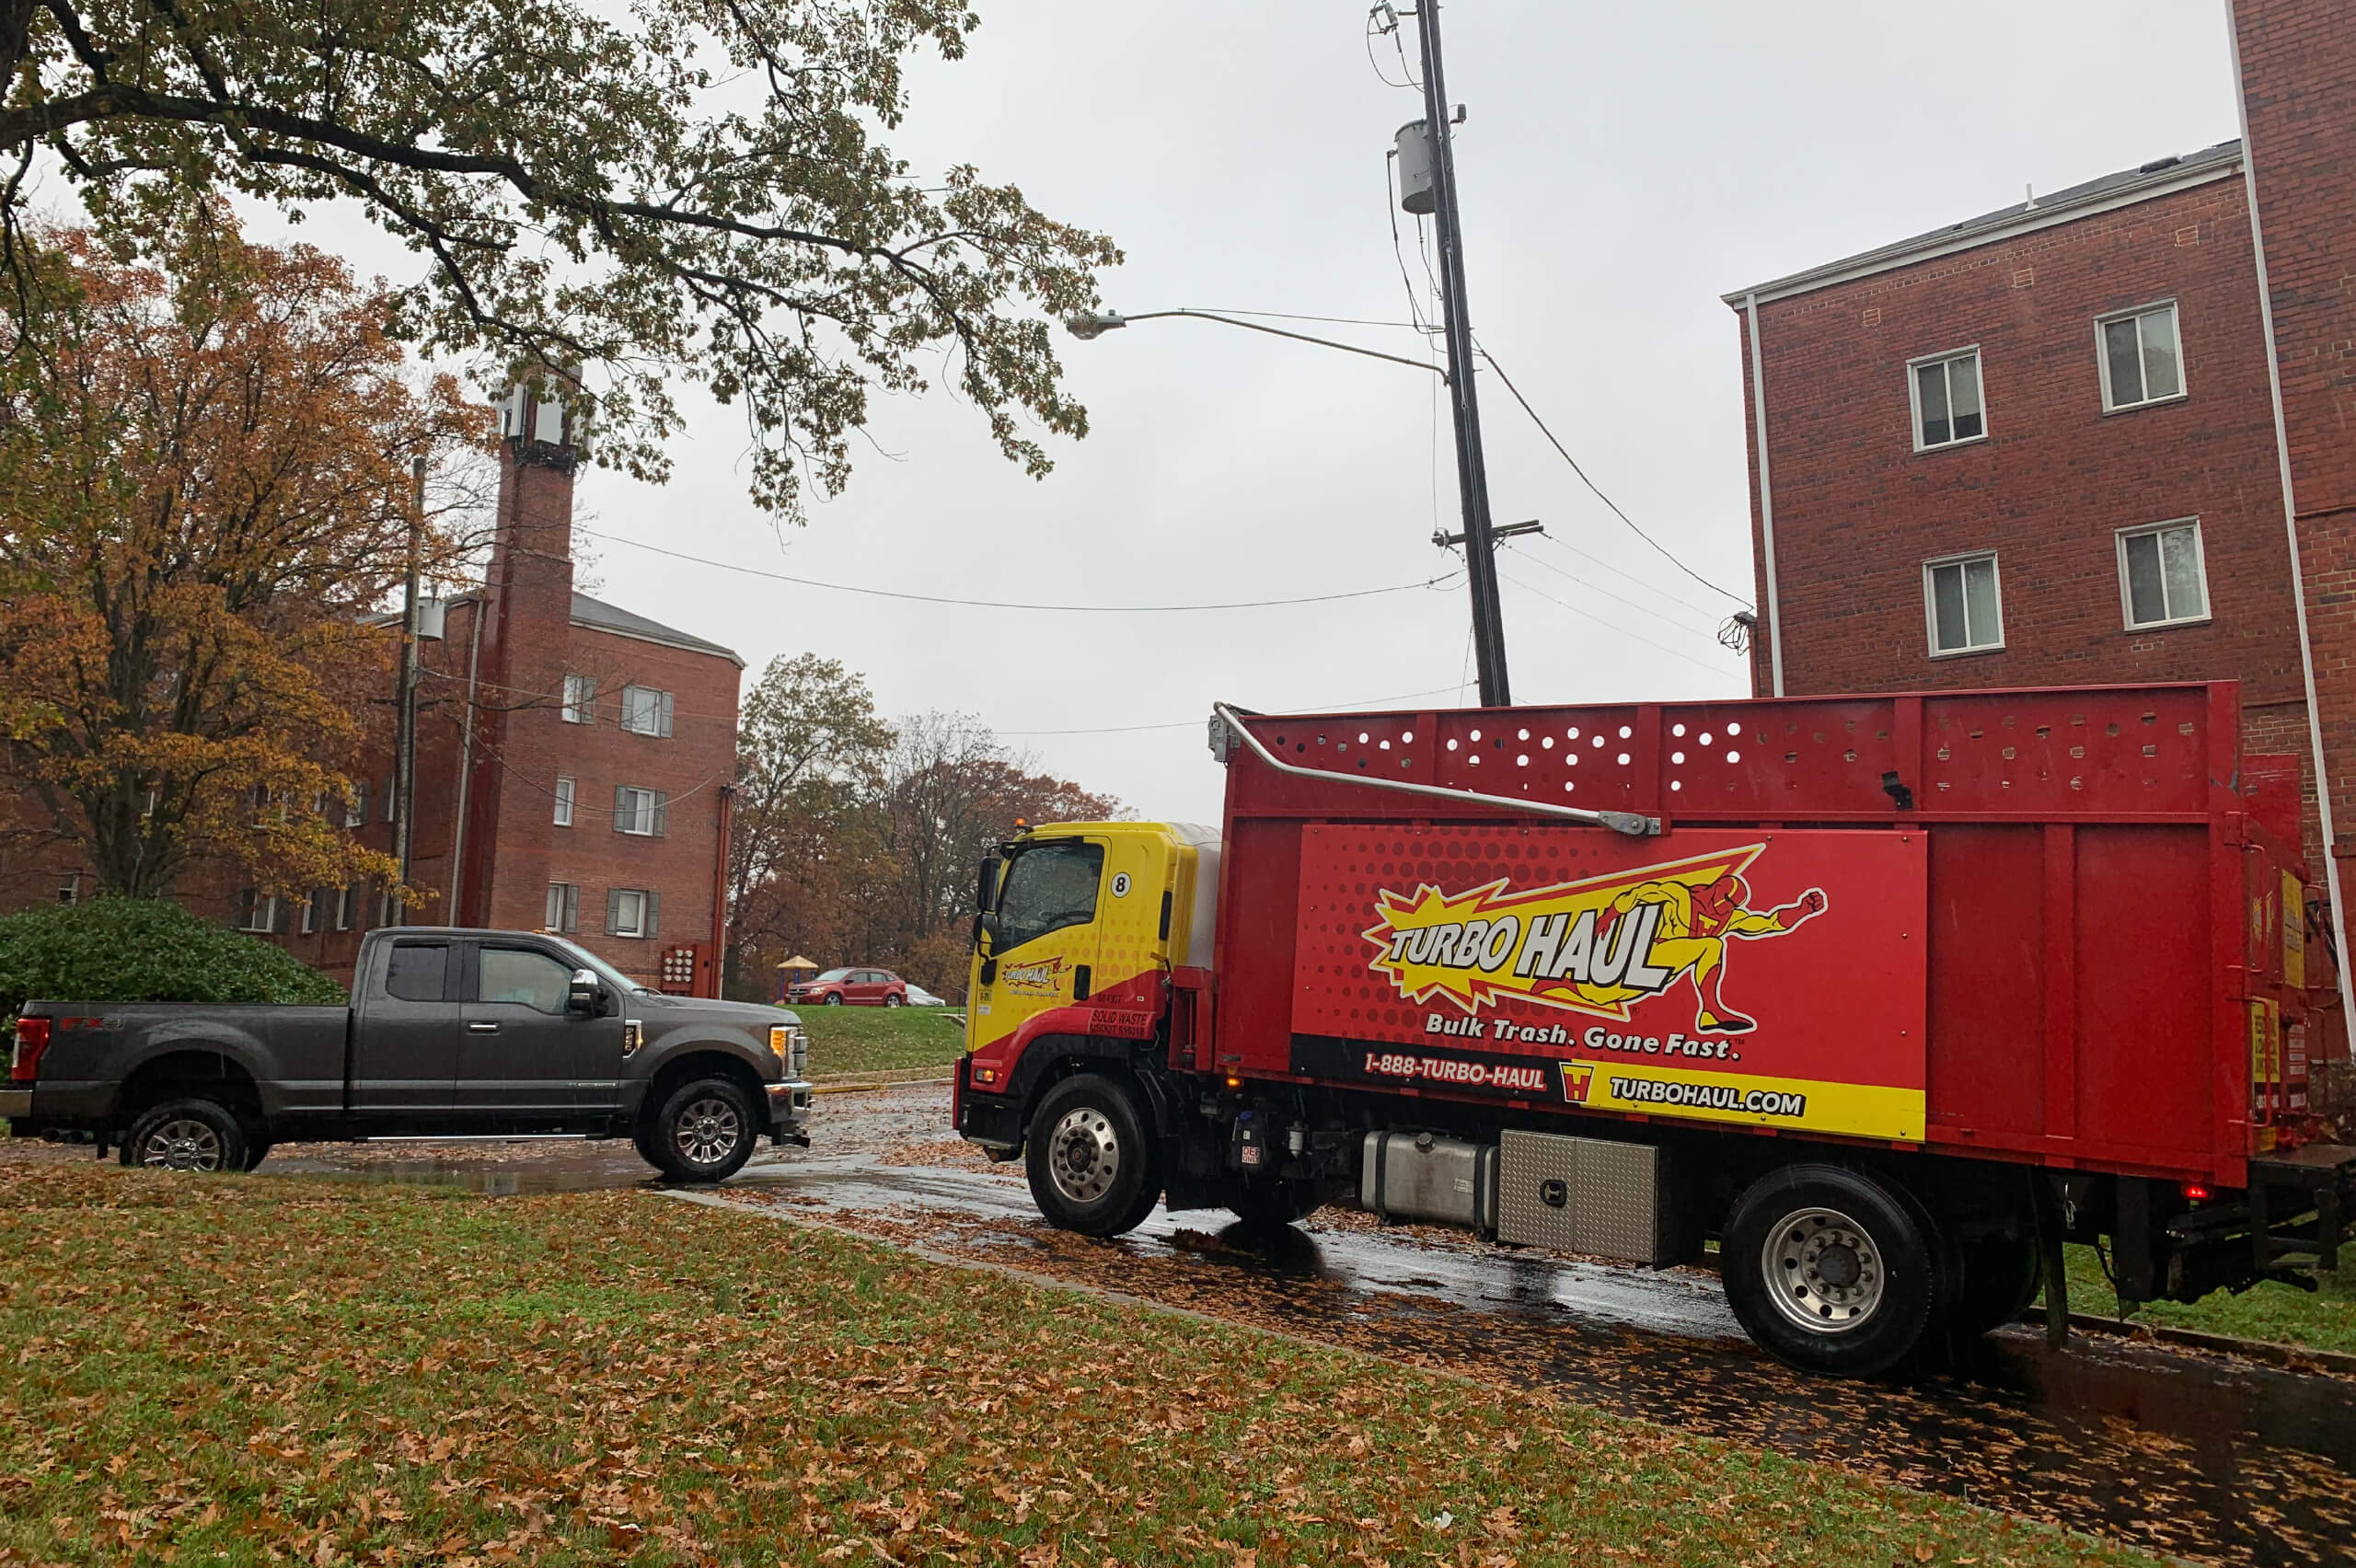 TurboHaul's big red trucks haul more bulk trash and junk than competitors in Chantilly, Virginia.